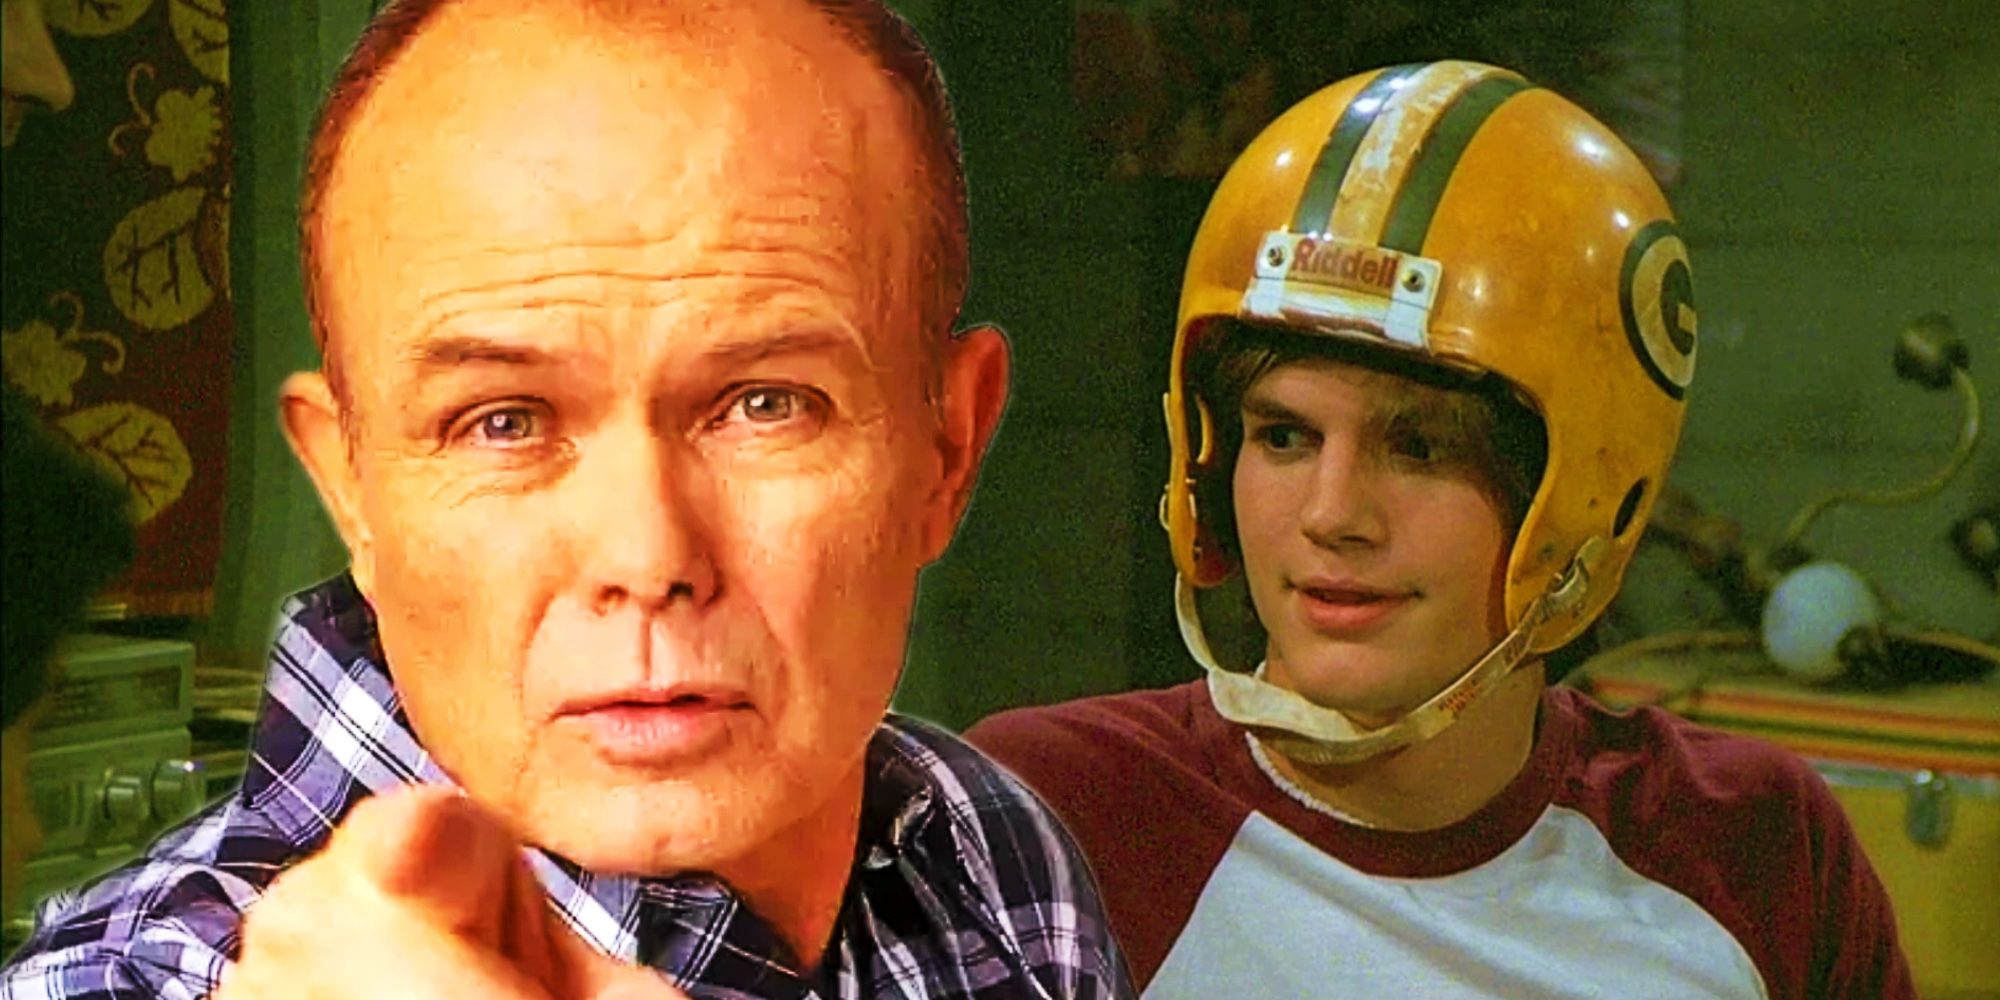 That '90s Show Can Fulfill Red's Packers Obsession